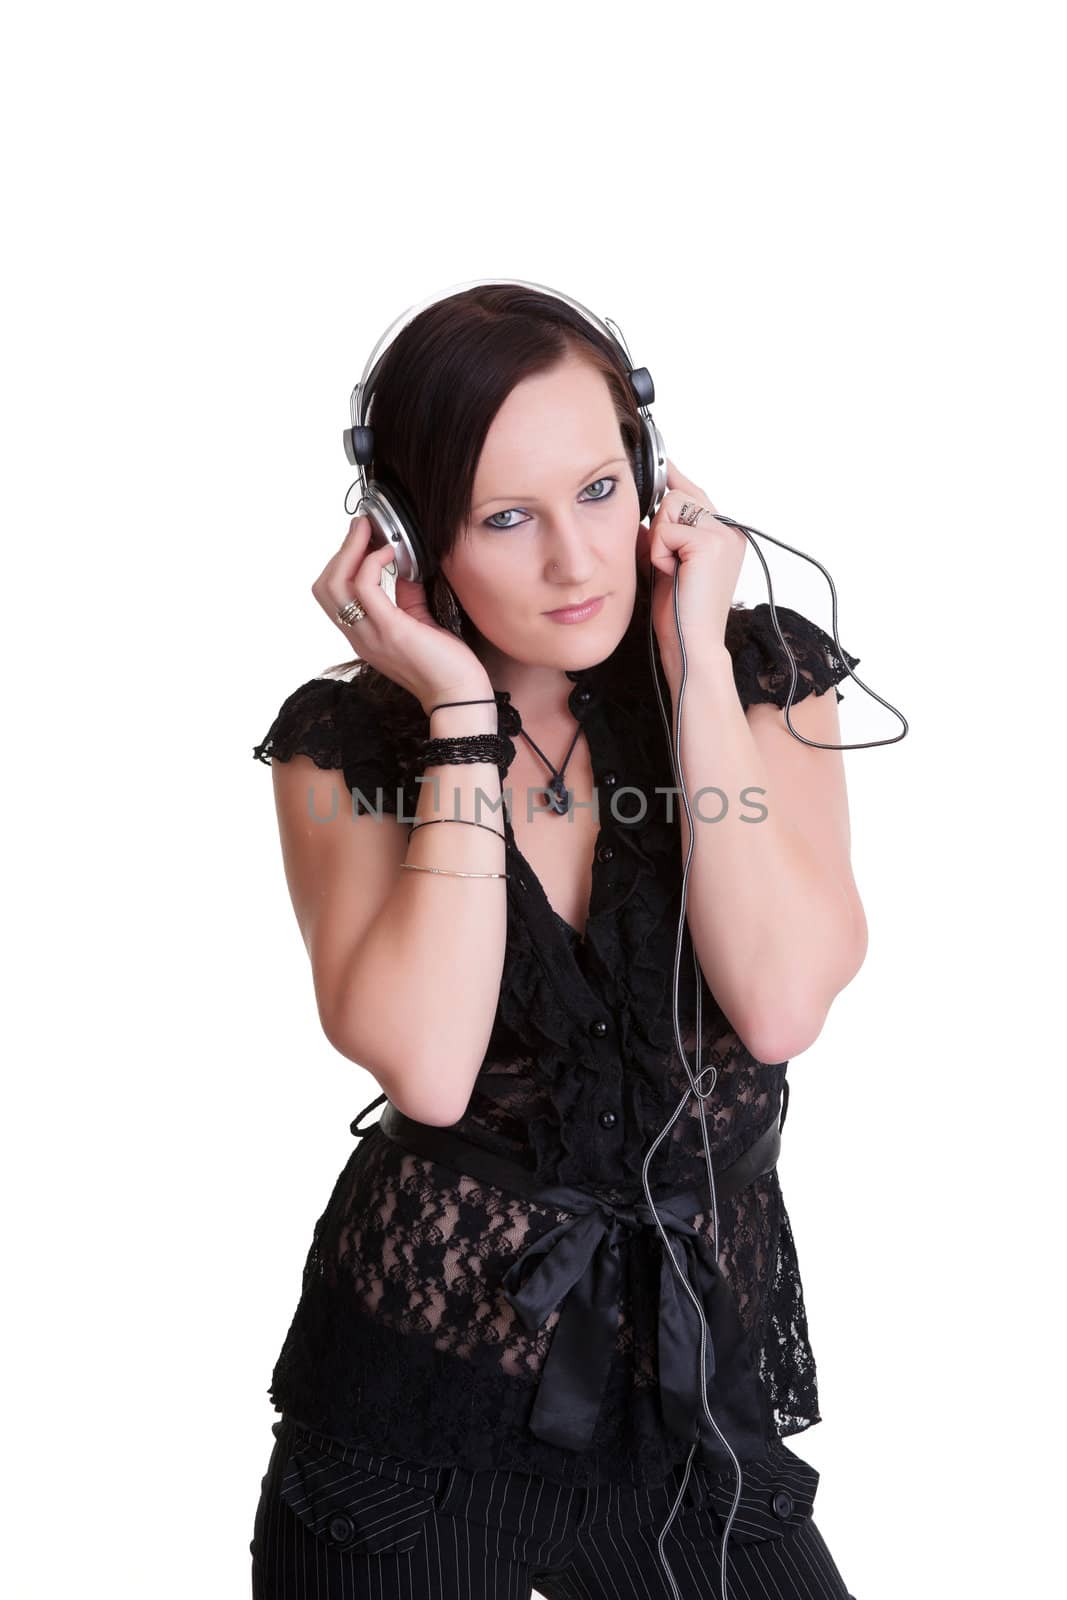 young woman listening headphones by clearviewstock